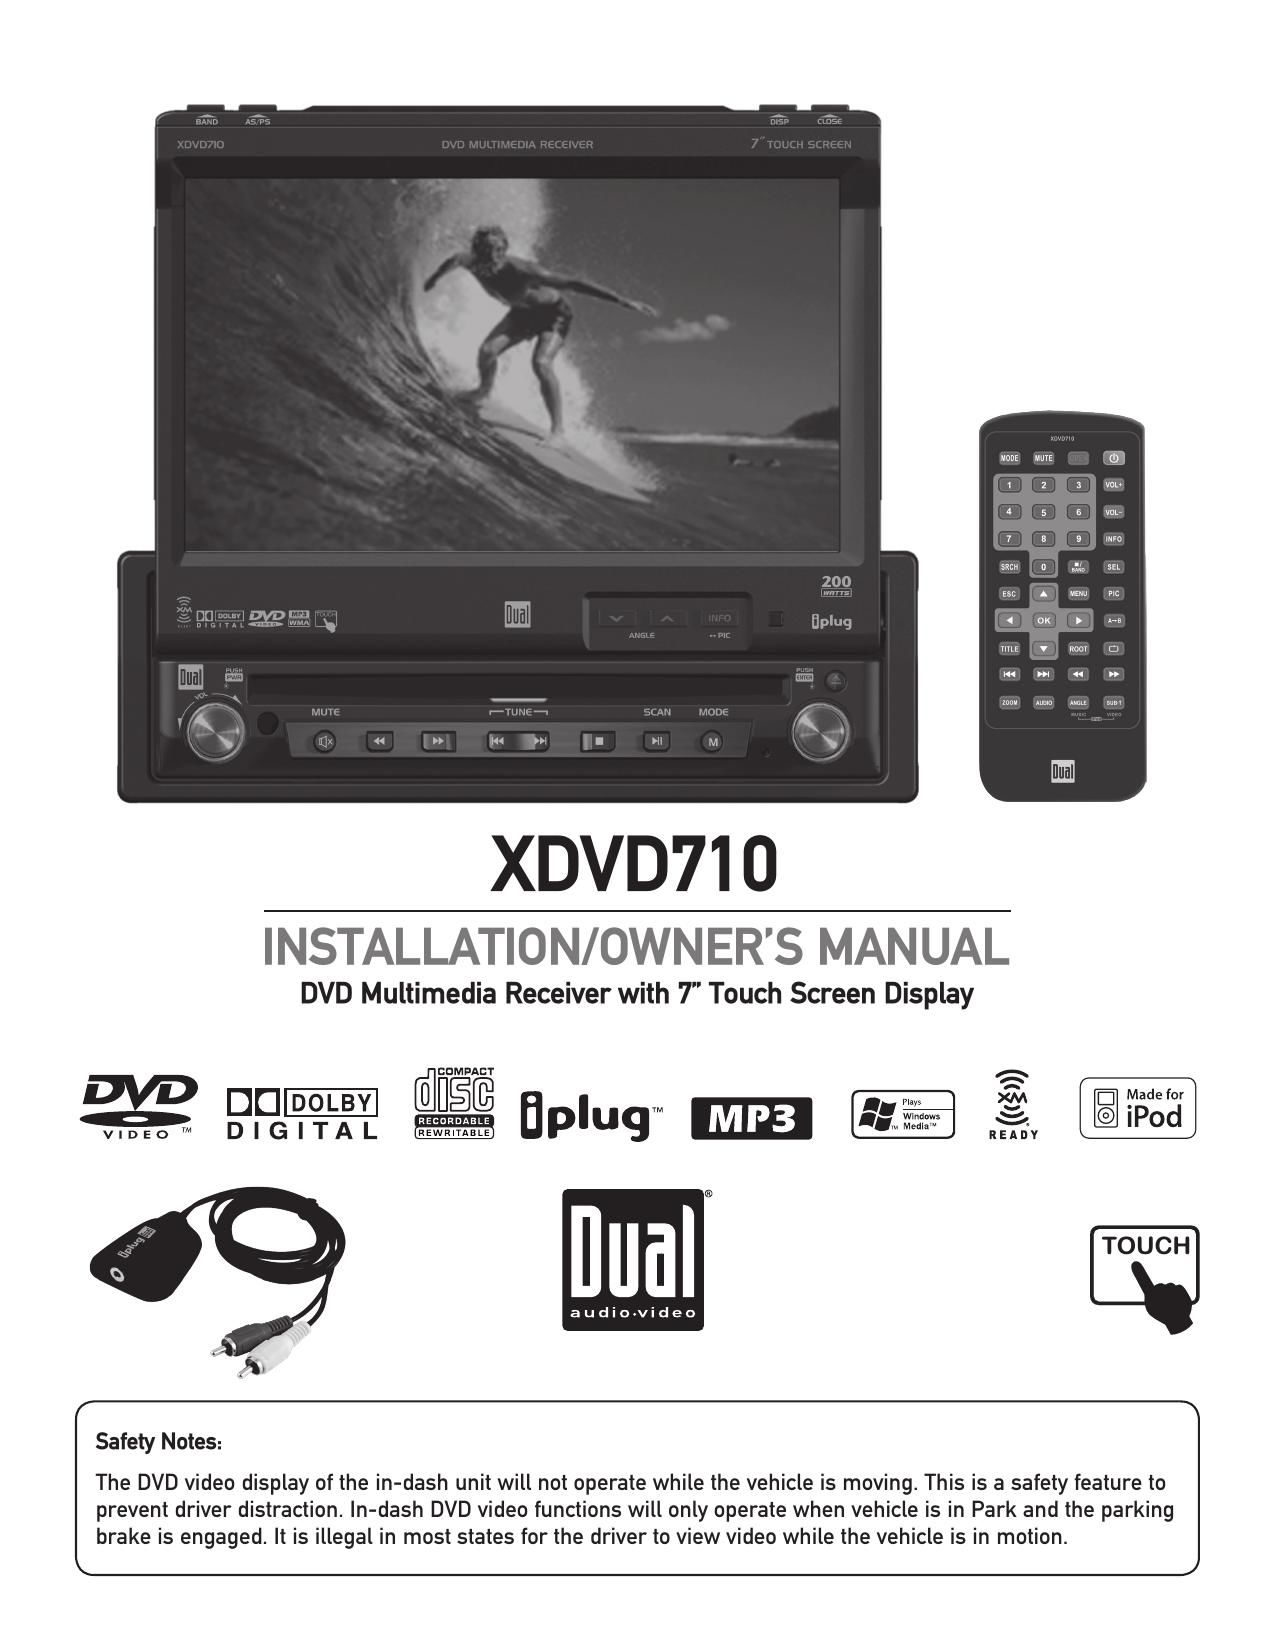 Dual XDVD 710 Owners Manual